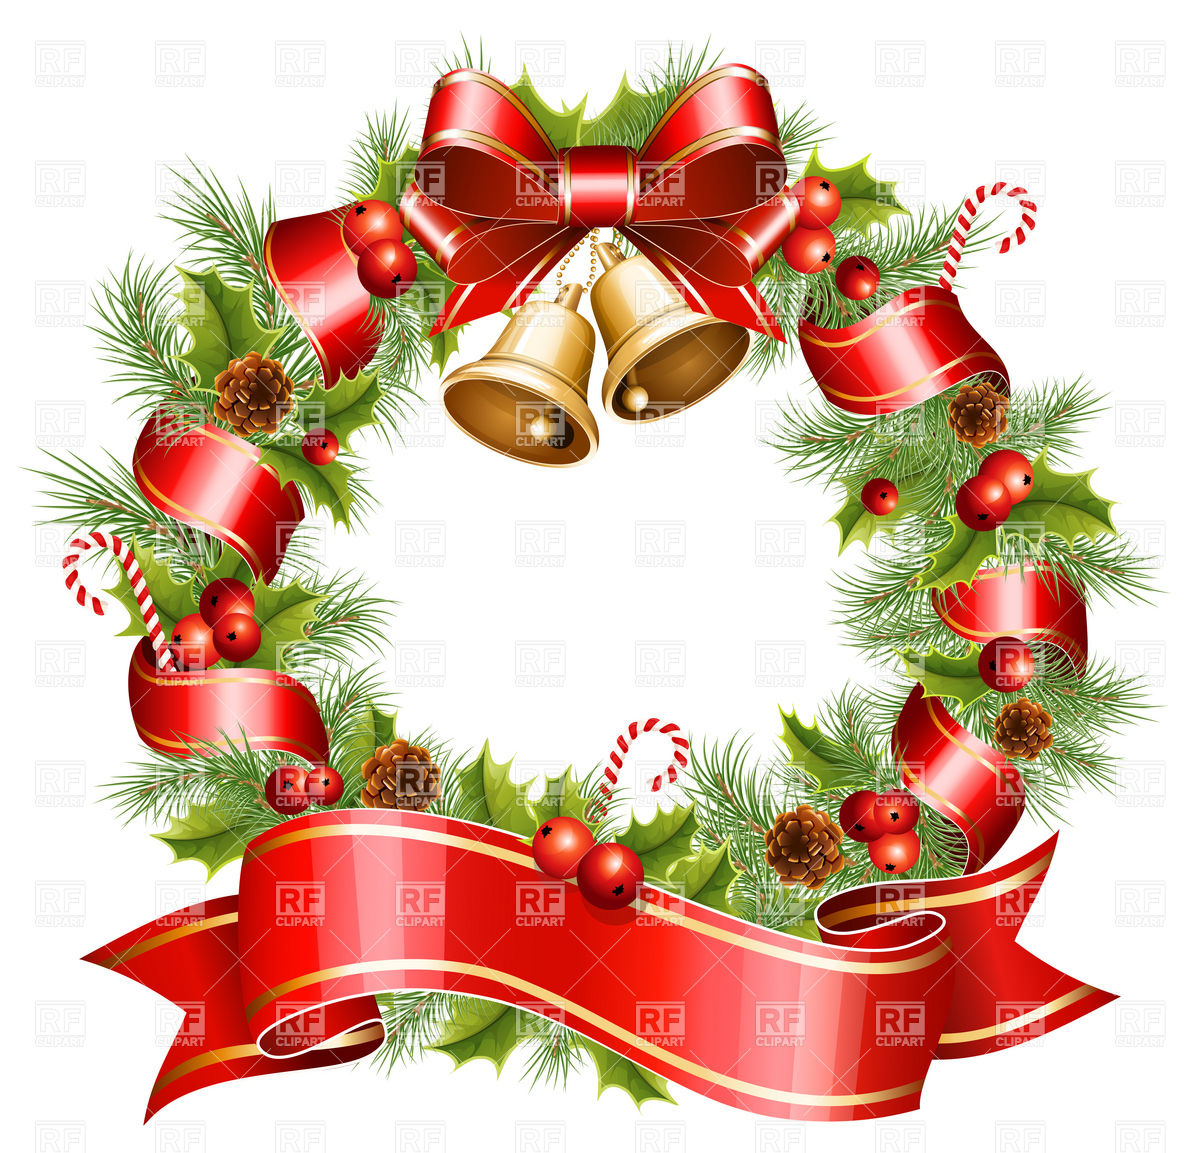 Christmas Wreath Holiday Download Royalty Free Vector Clip Art Image